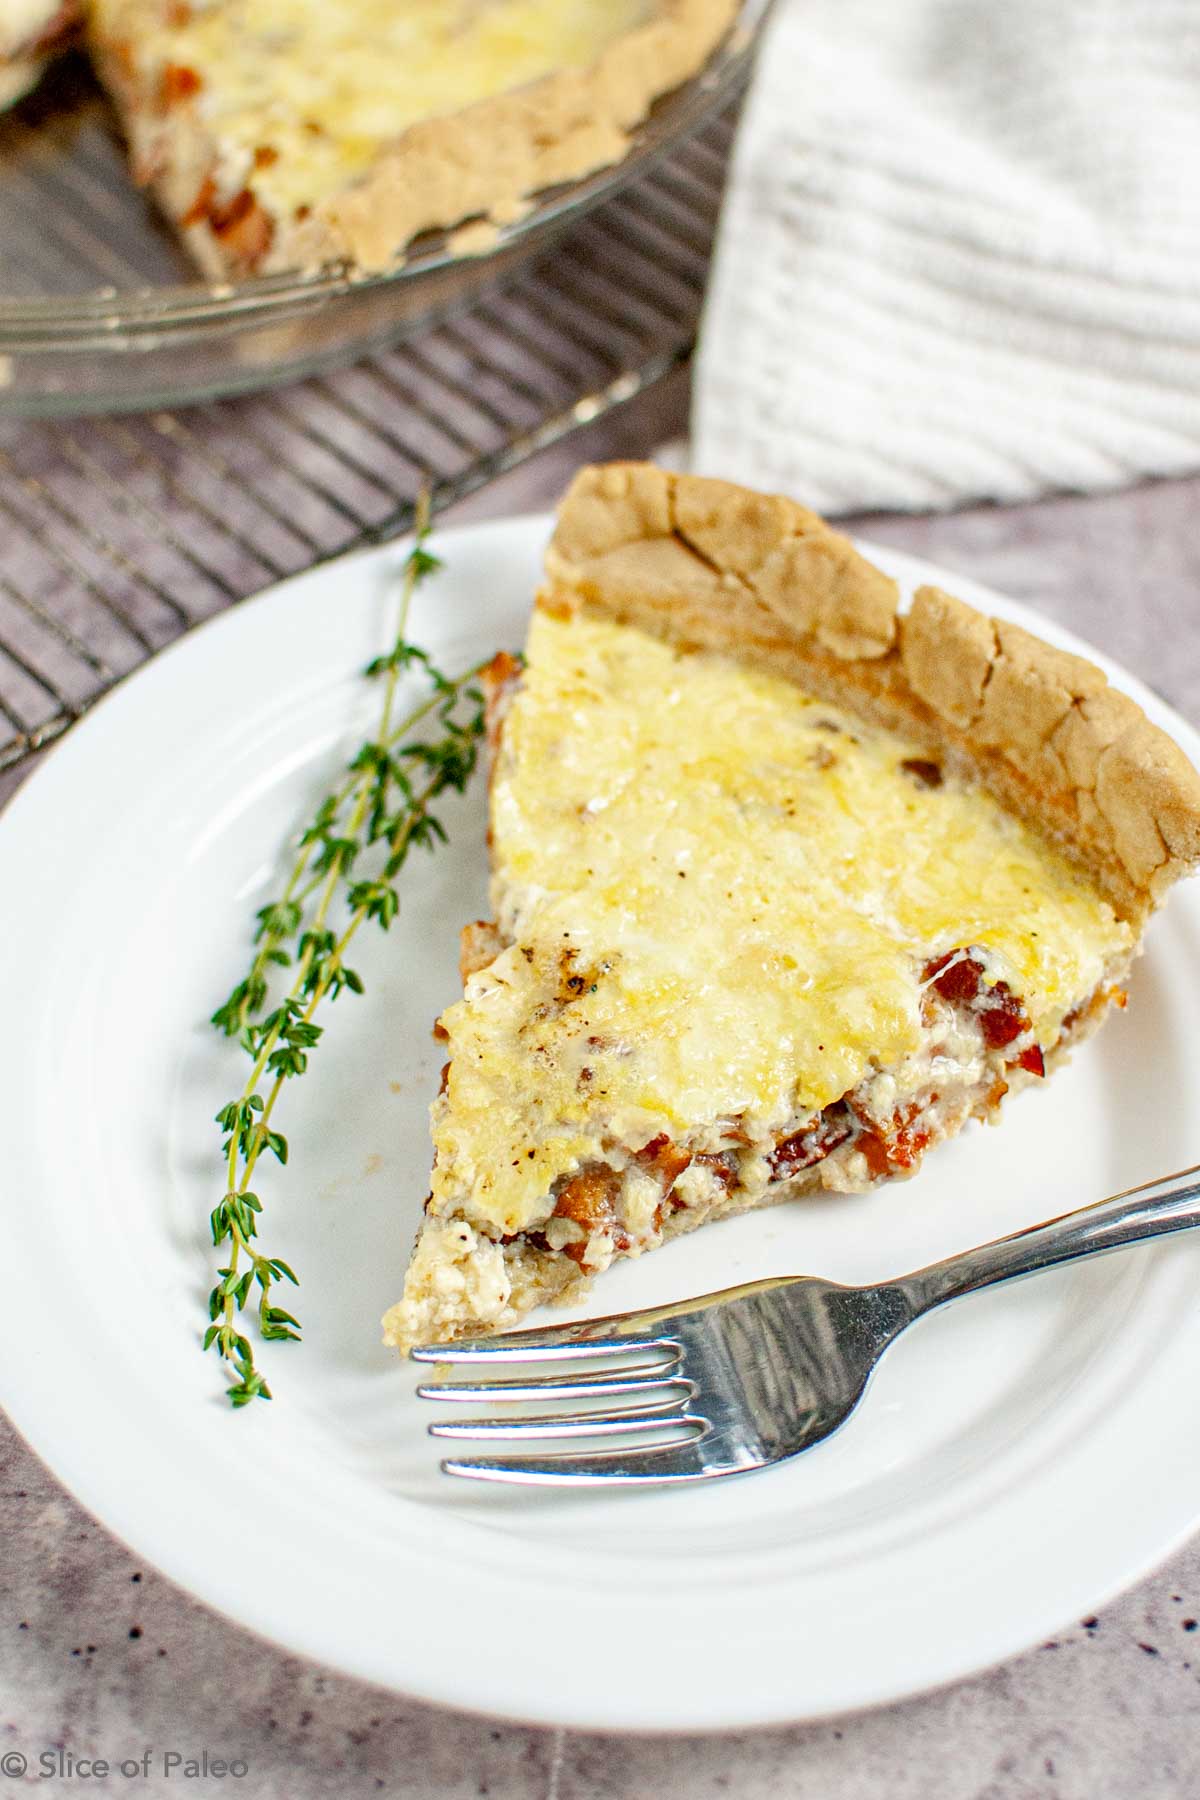 Gluten Free Quiche Lorraine with Sheep's Milk Cheese served on a white plate